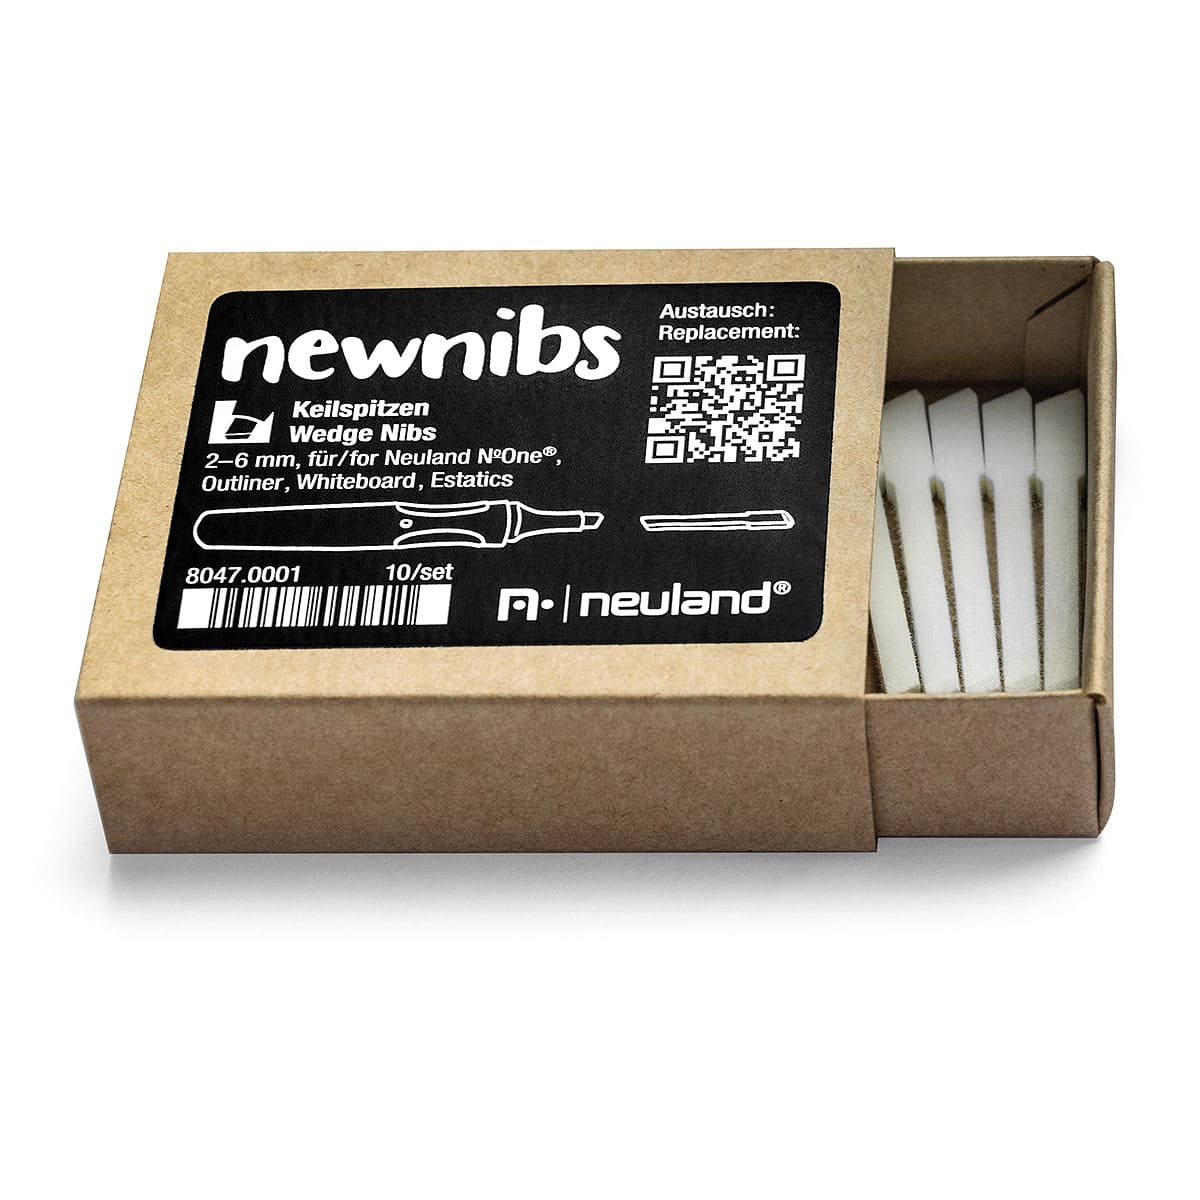 Replacement Wedge Nibs, 2-6 mm – for Neuland No.One®